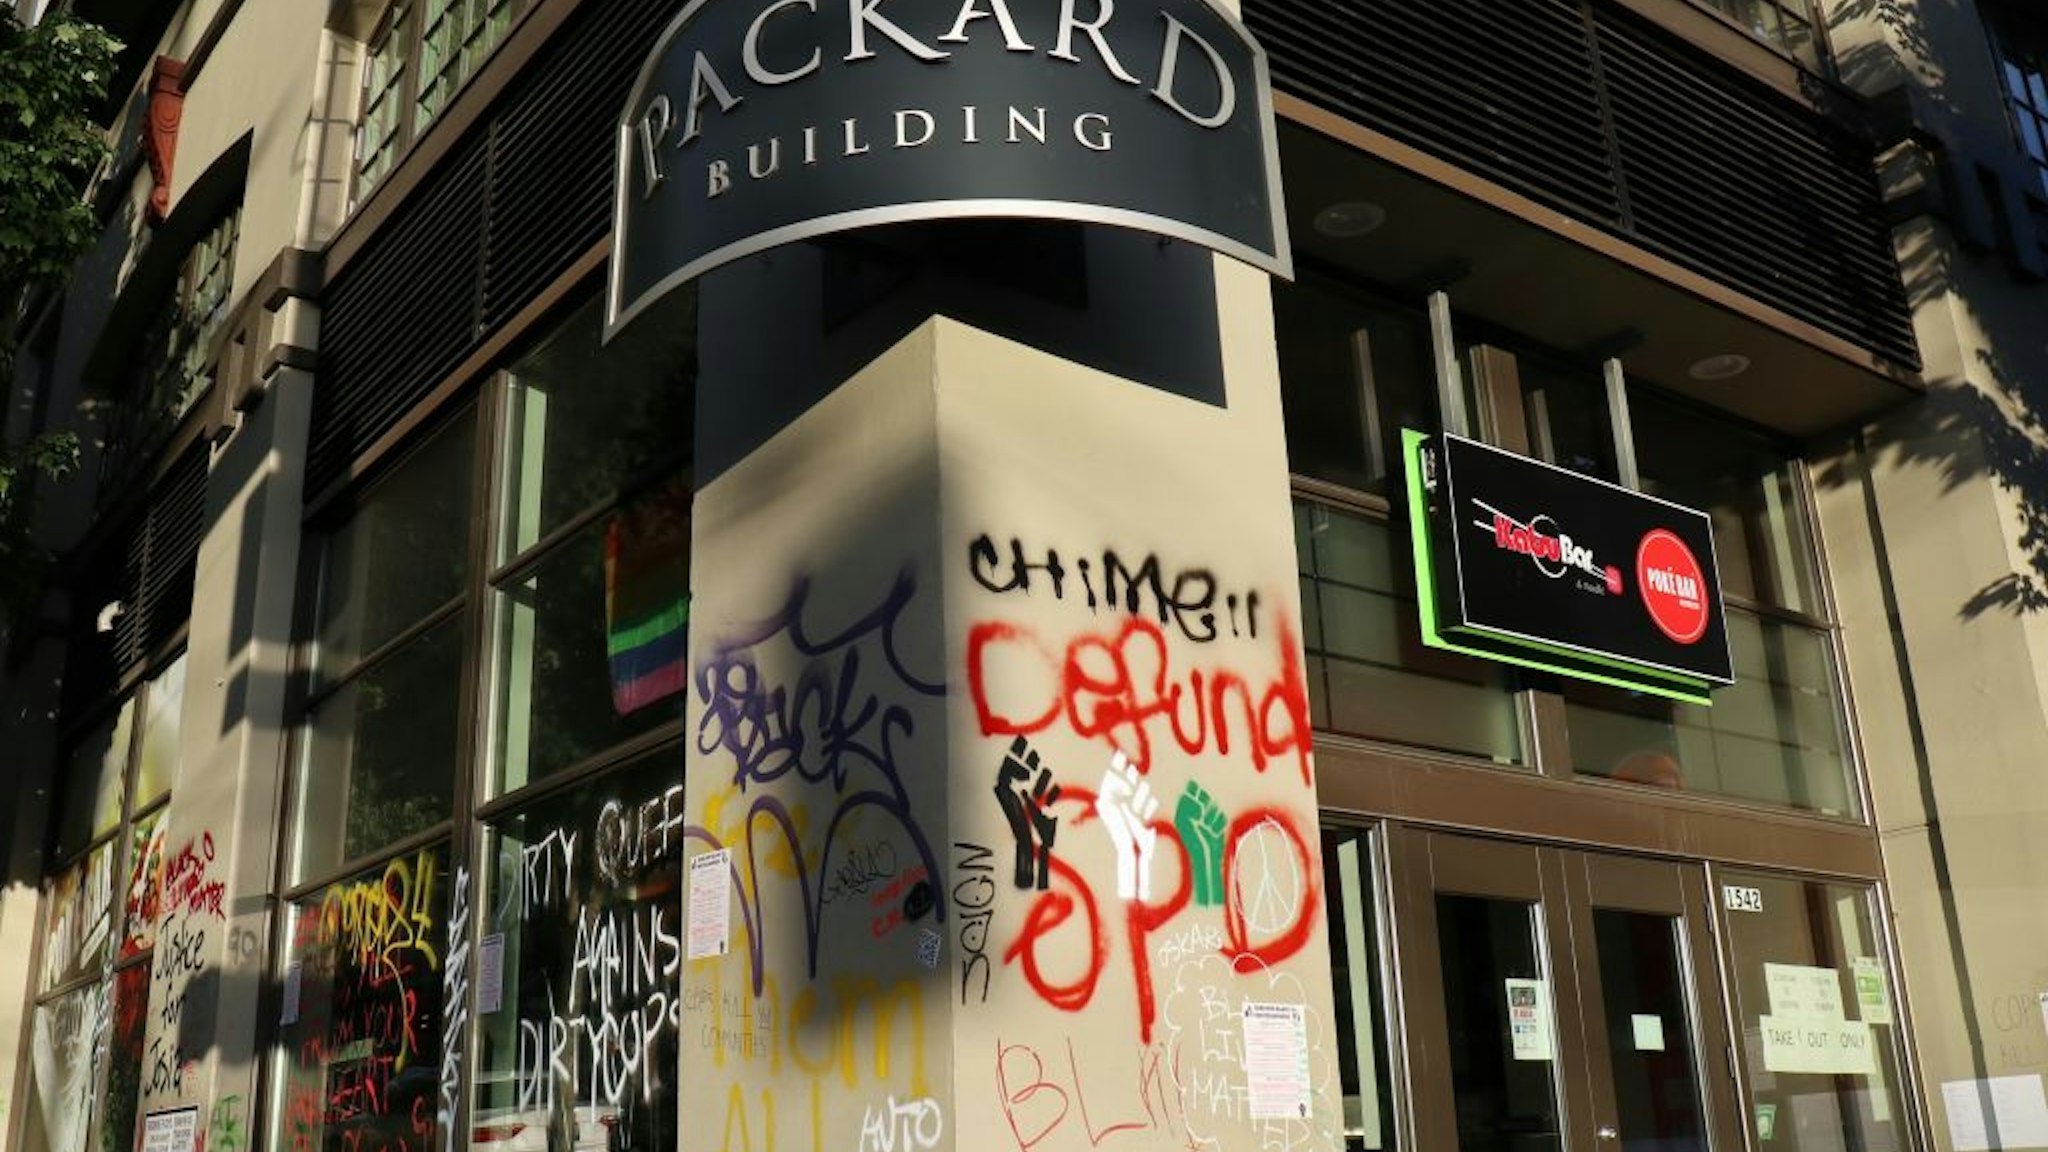 The Packard Building, an apartment building inside Seattle's so-called Capitol Hill Autonomous Zone, is seen being damaged and vandalized.